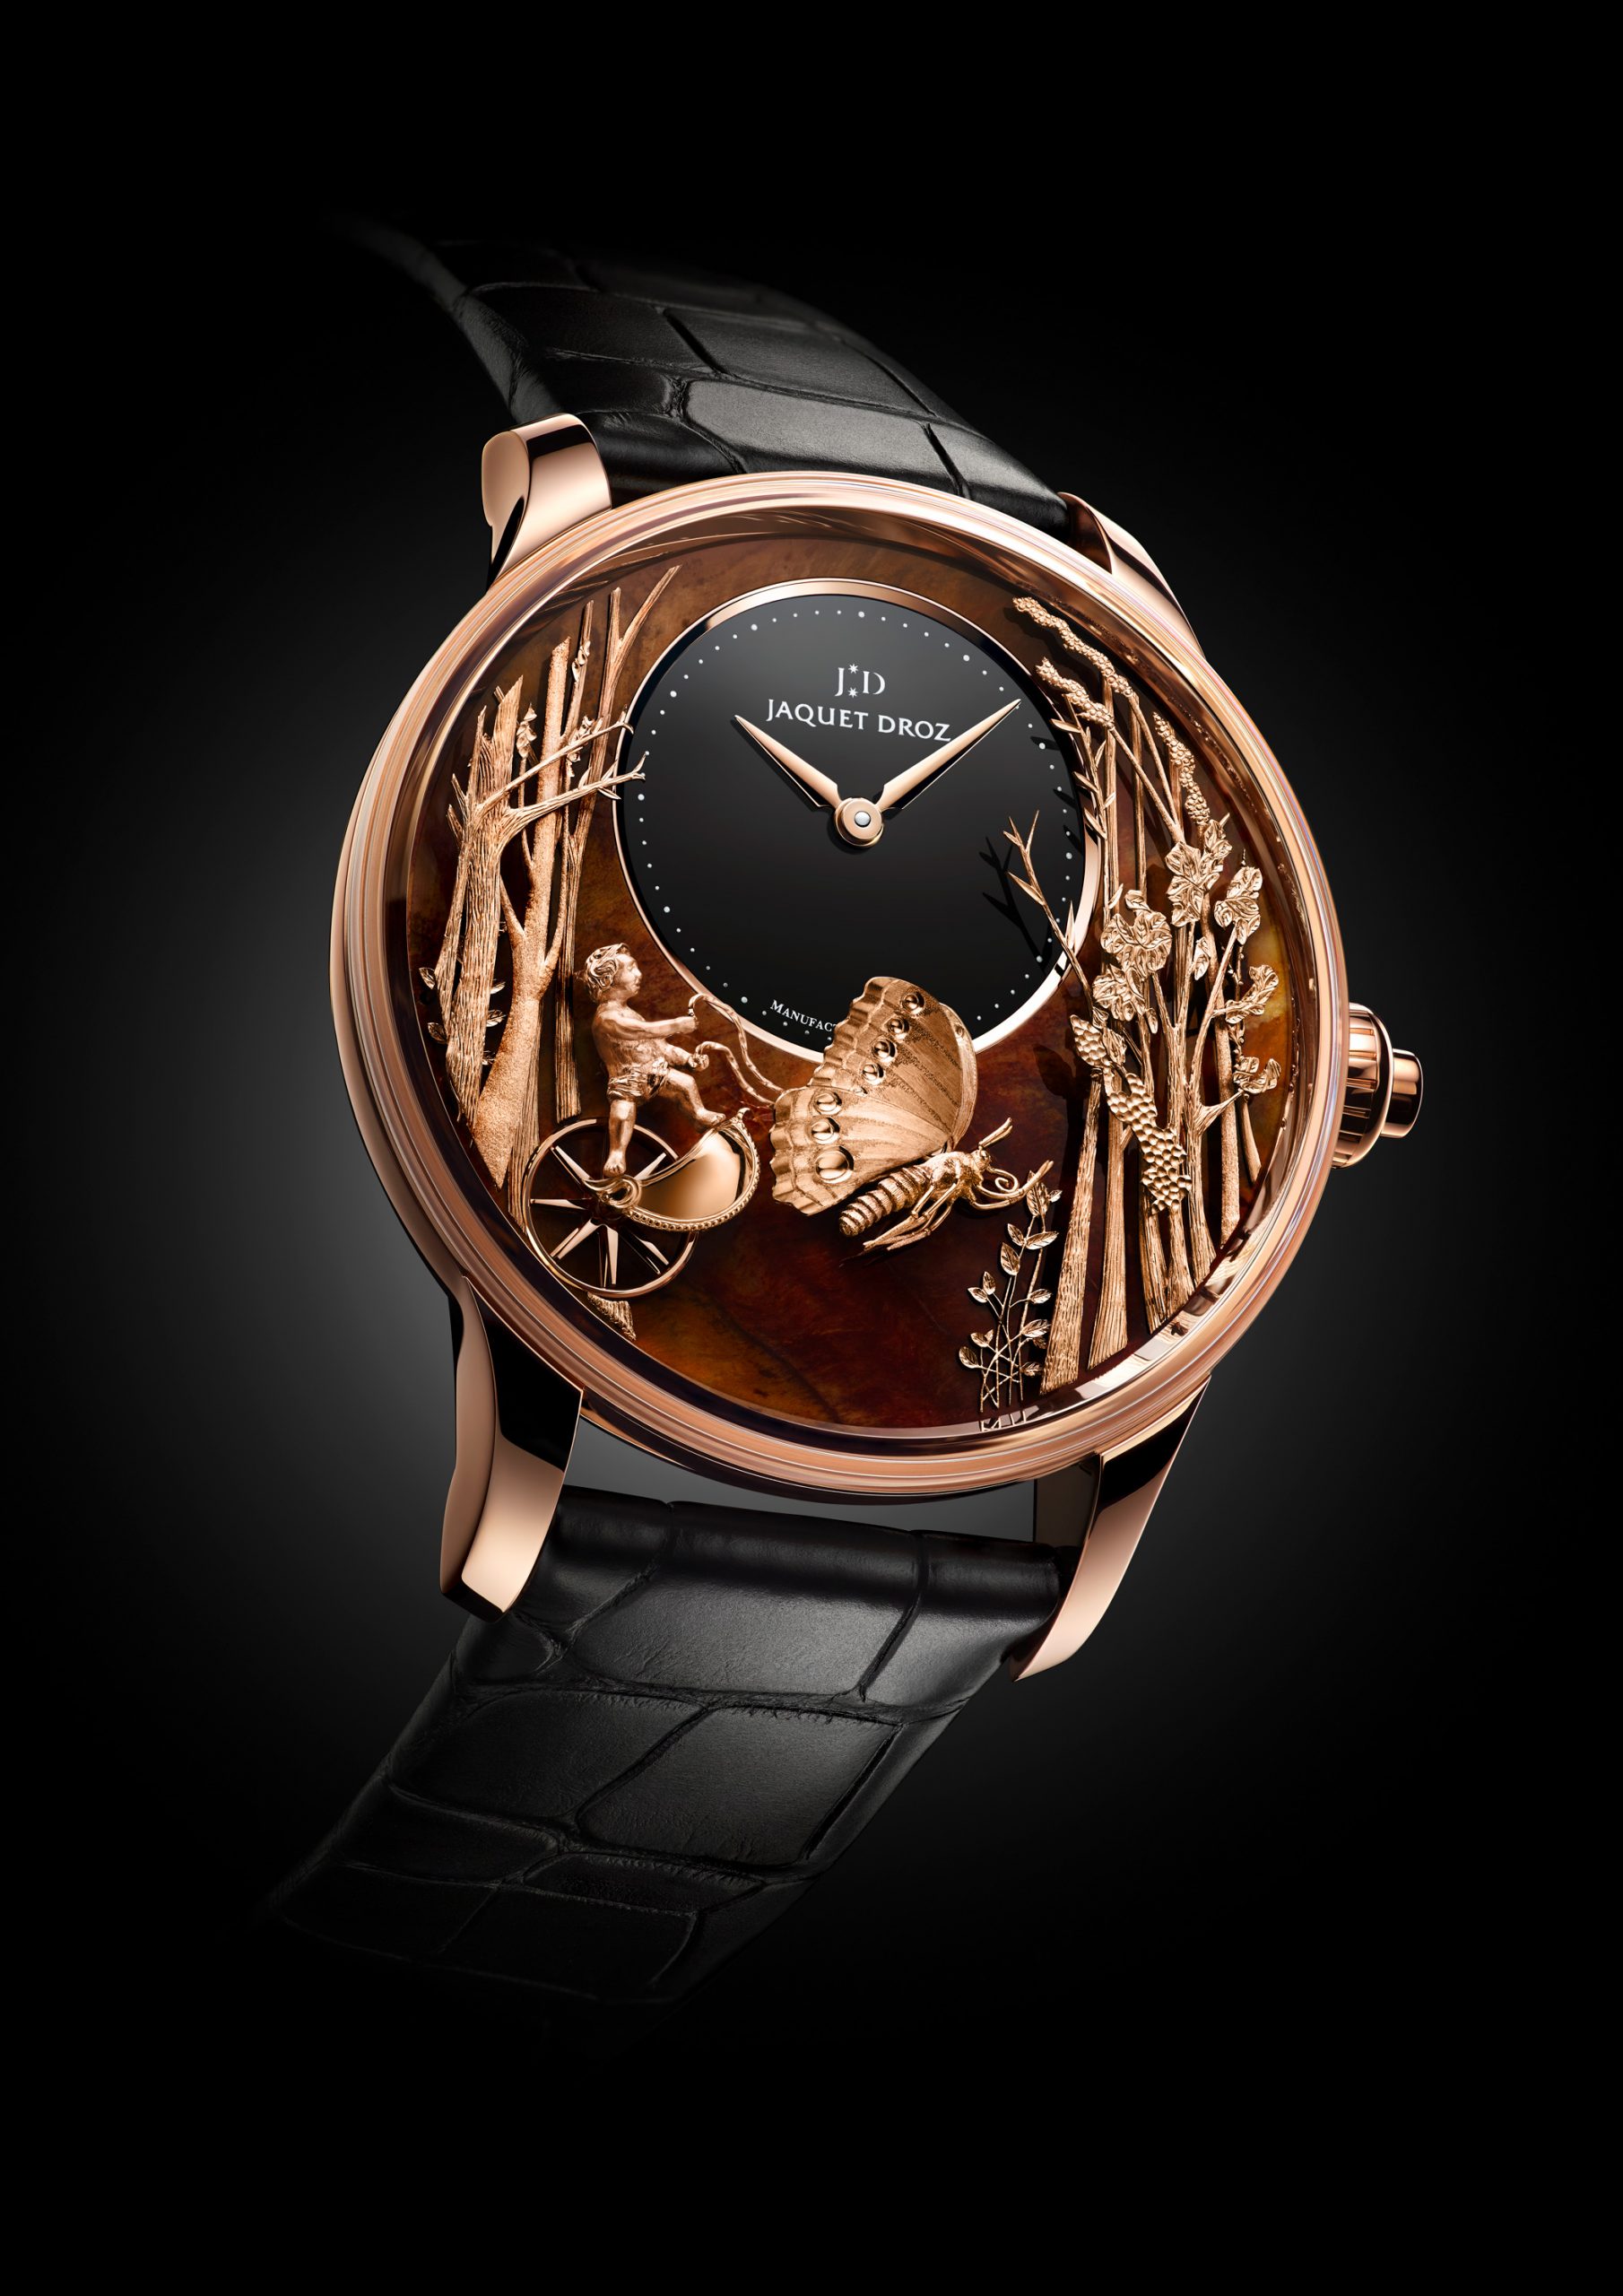 Jaquet Droz Loving Butterfly Automaton - Jaquet Droz gives its Loving ...